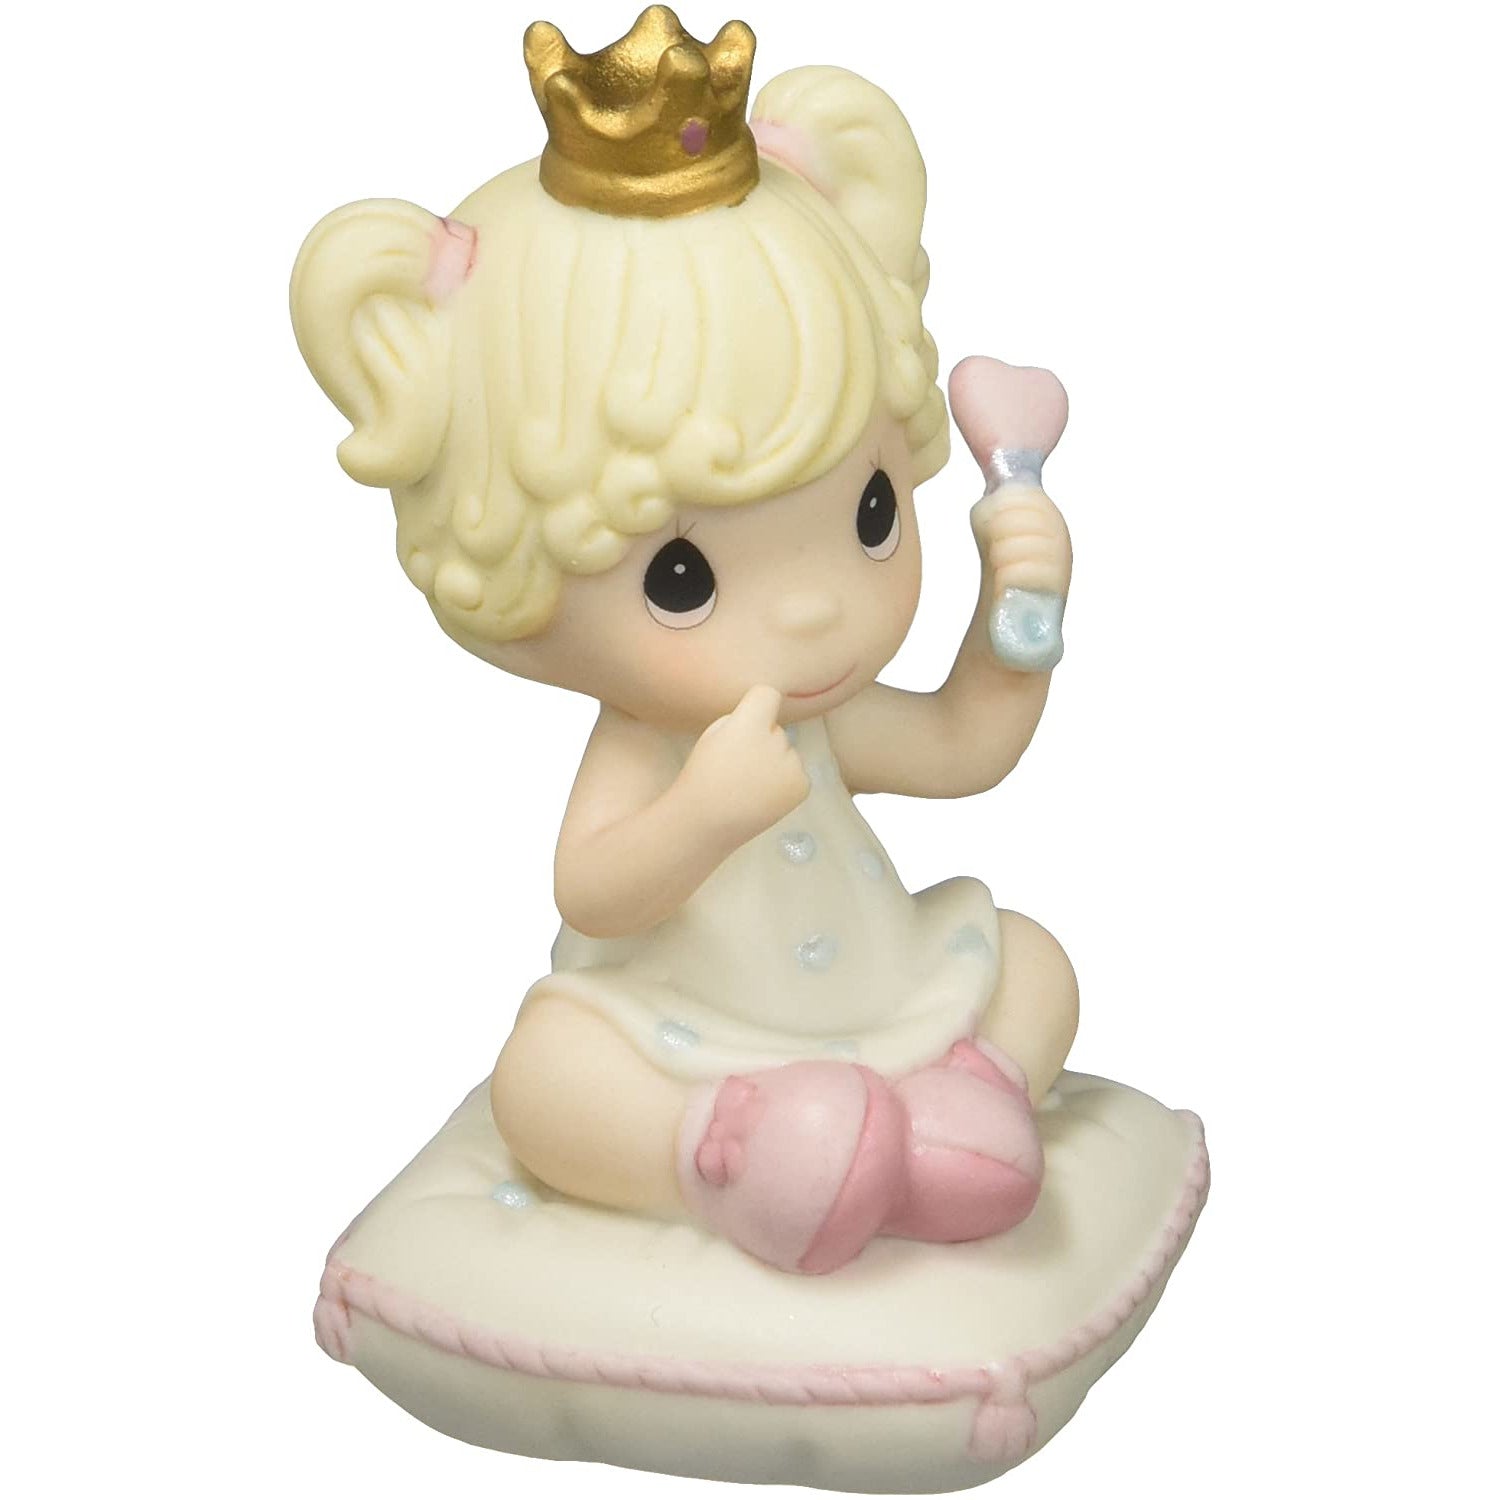 Precious Moments Baby Gifts Lil' Princess Bisque Porcelain Figurine